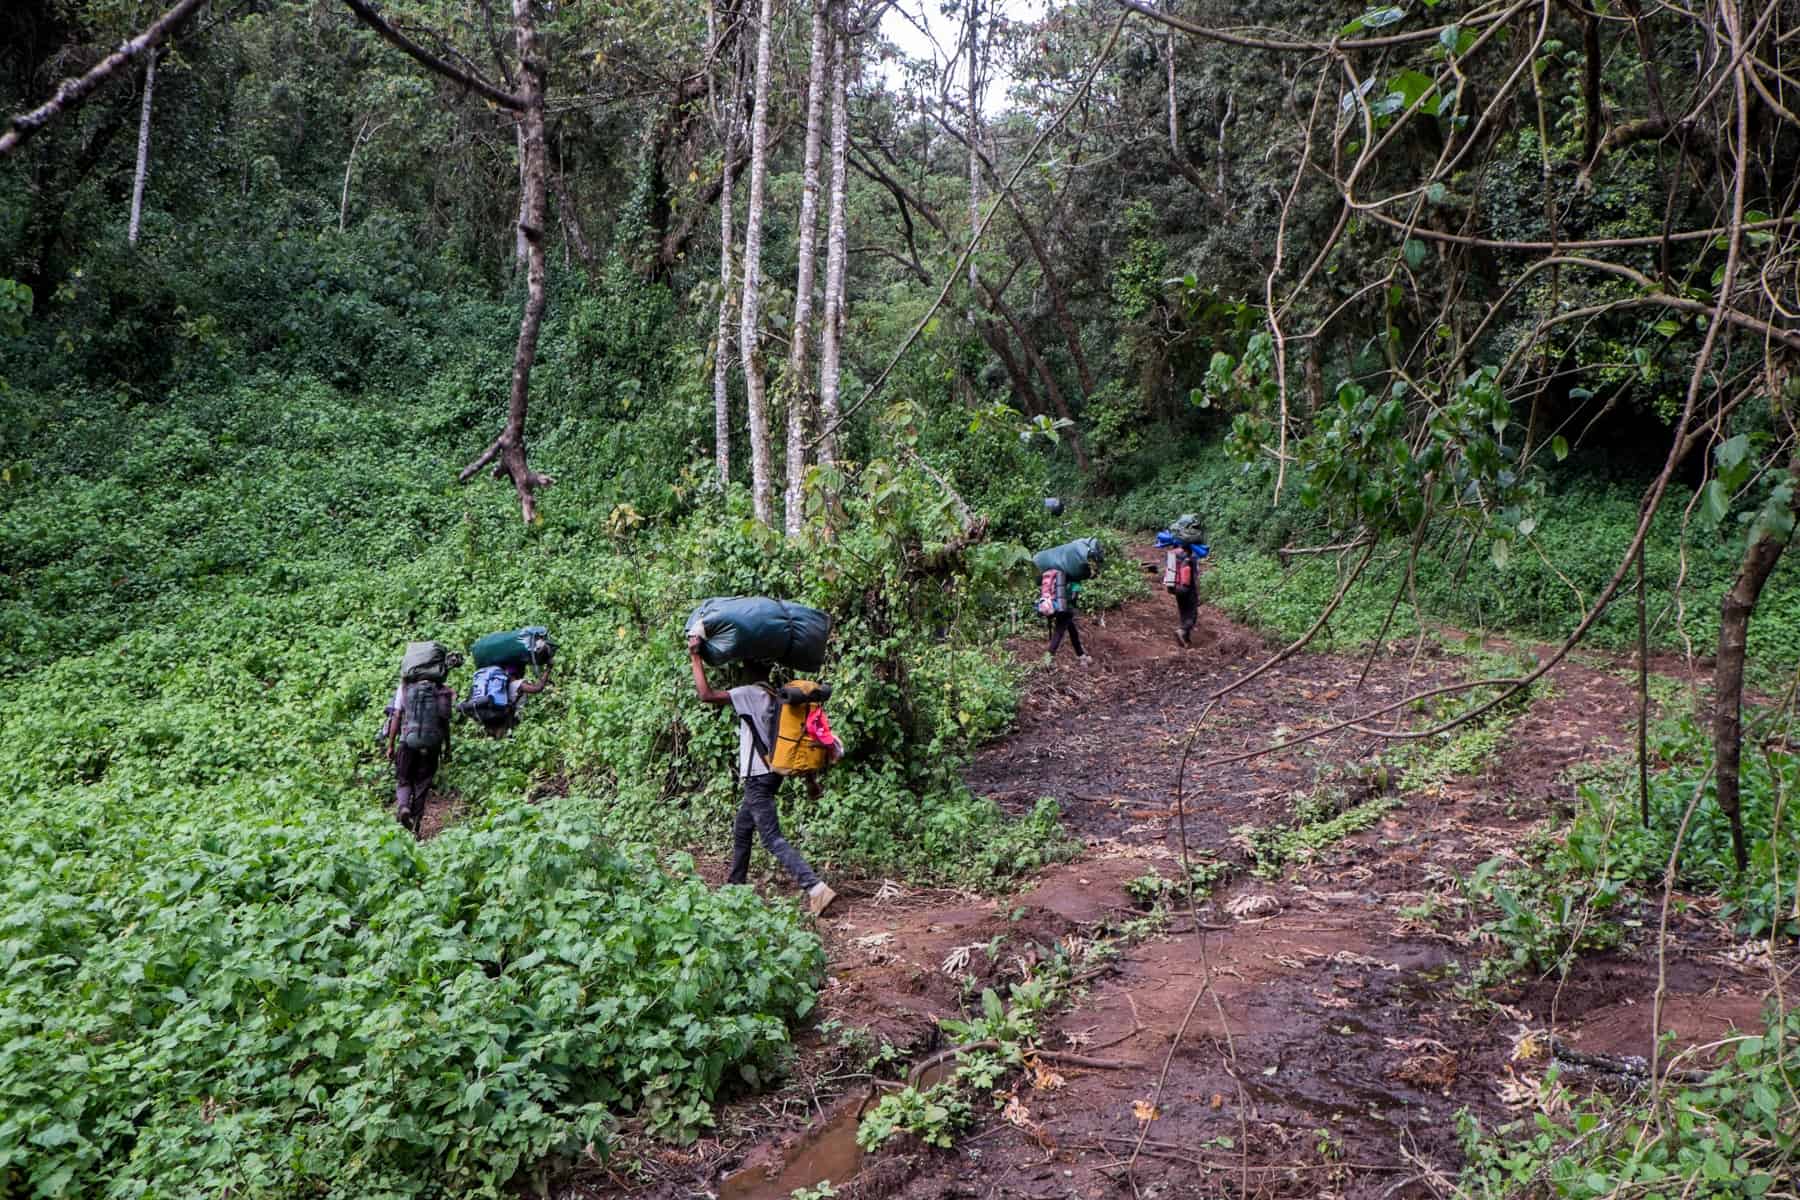 Fiver porters carrying green bags on their heads, walk on a orange mud pathway in the Rainforest Zone of Kilimanjaro.